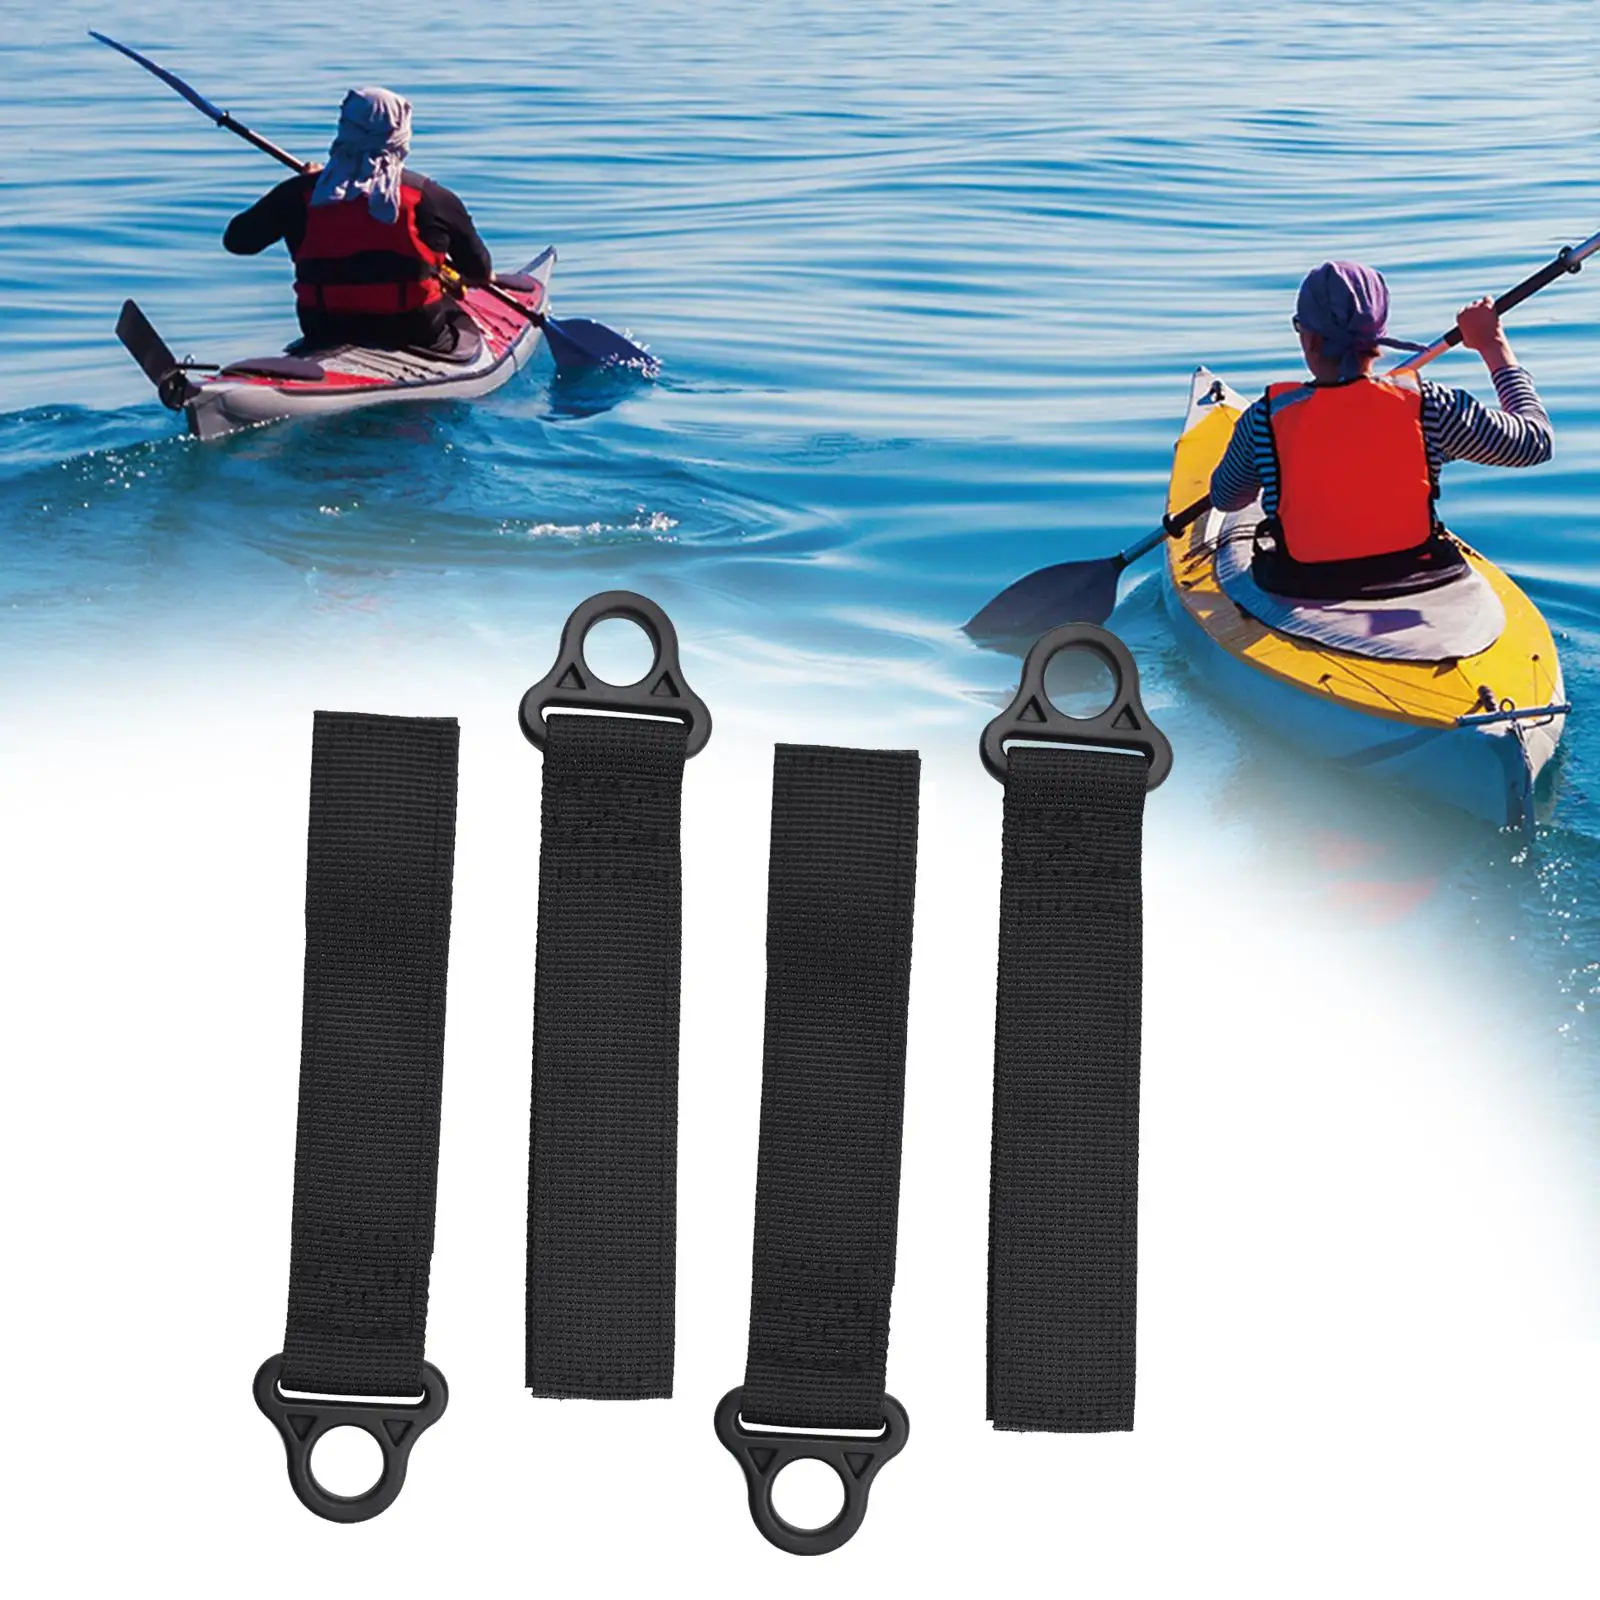 4 Pieces Paddle Board Accessories Dinghy Surfboard Watercraft Lightweight Durable Paddleboard Fishing Pole Kayak Paddle Keeper